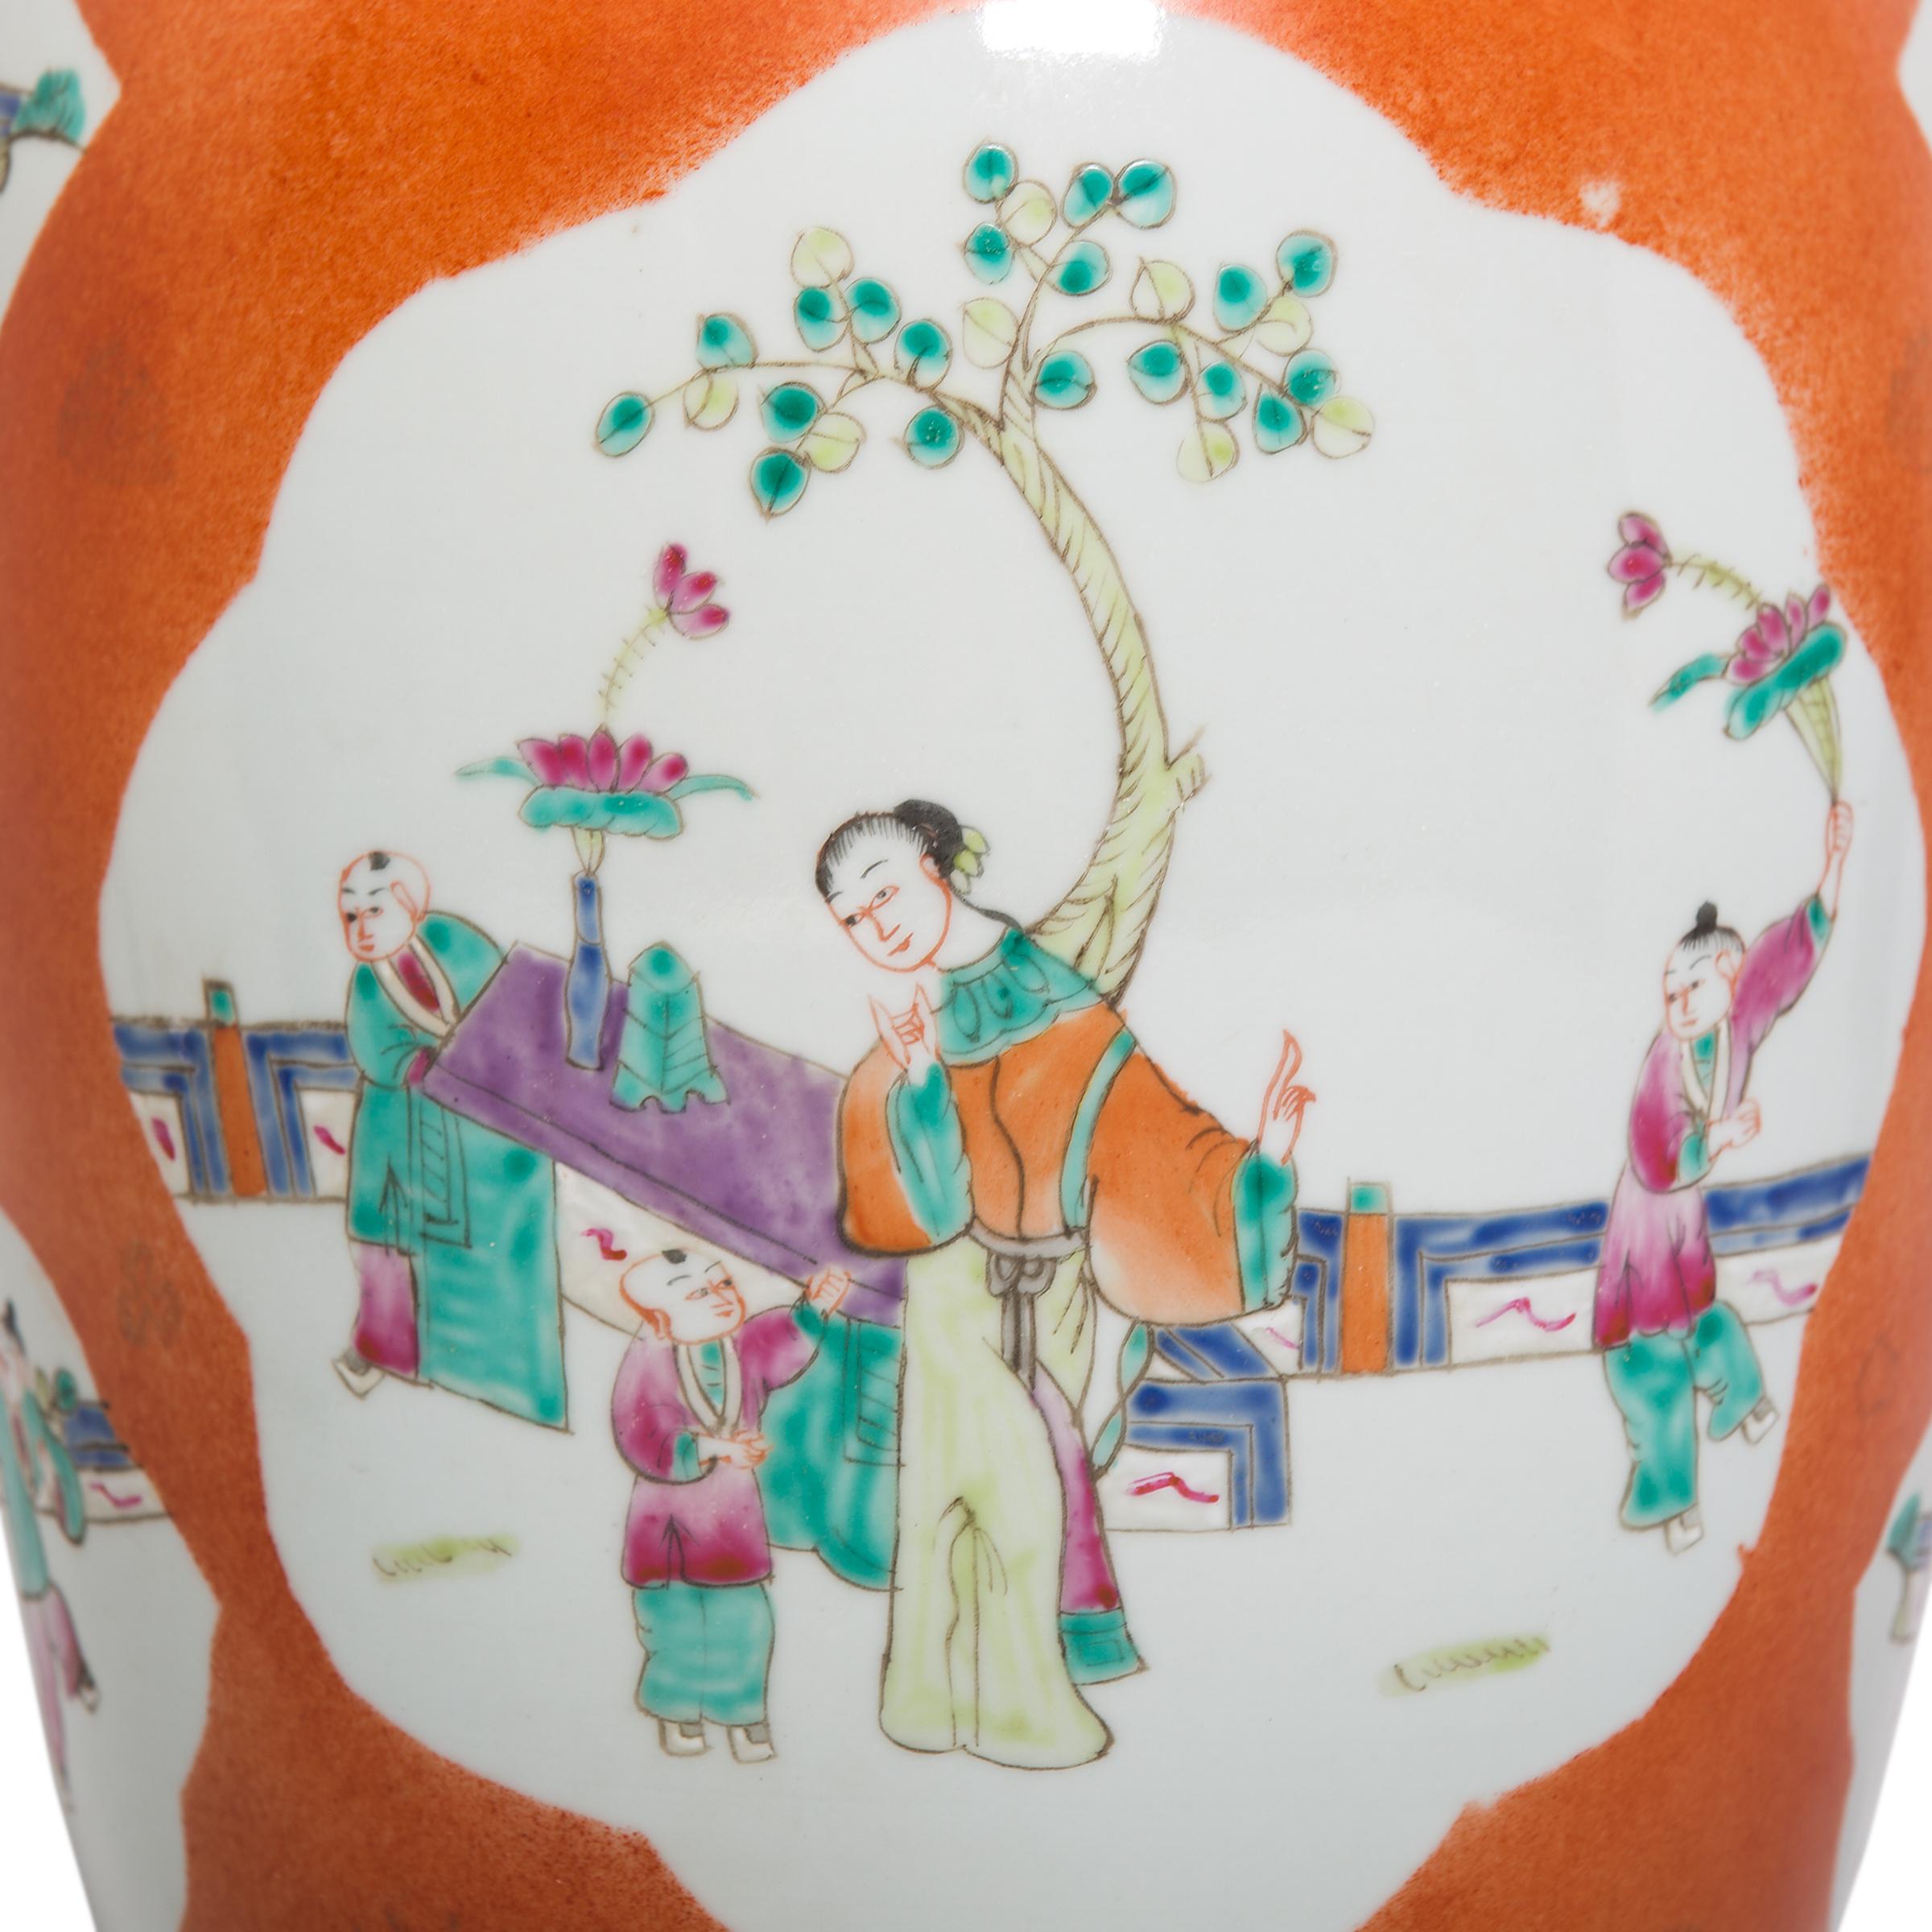 This vase is a perfect example of enduring Chinese symbolism and design. The attendants in the garden are watching over young boys playing with lotus branches, butterflies and small charms. All of these images are wishes of prosperity and longevity